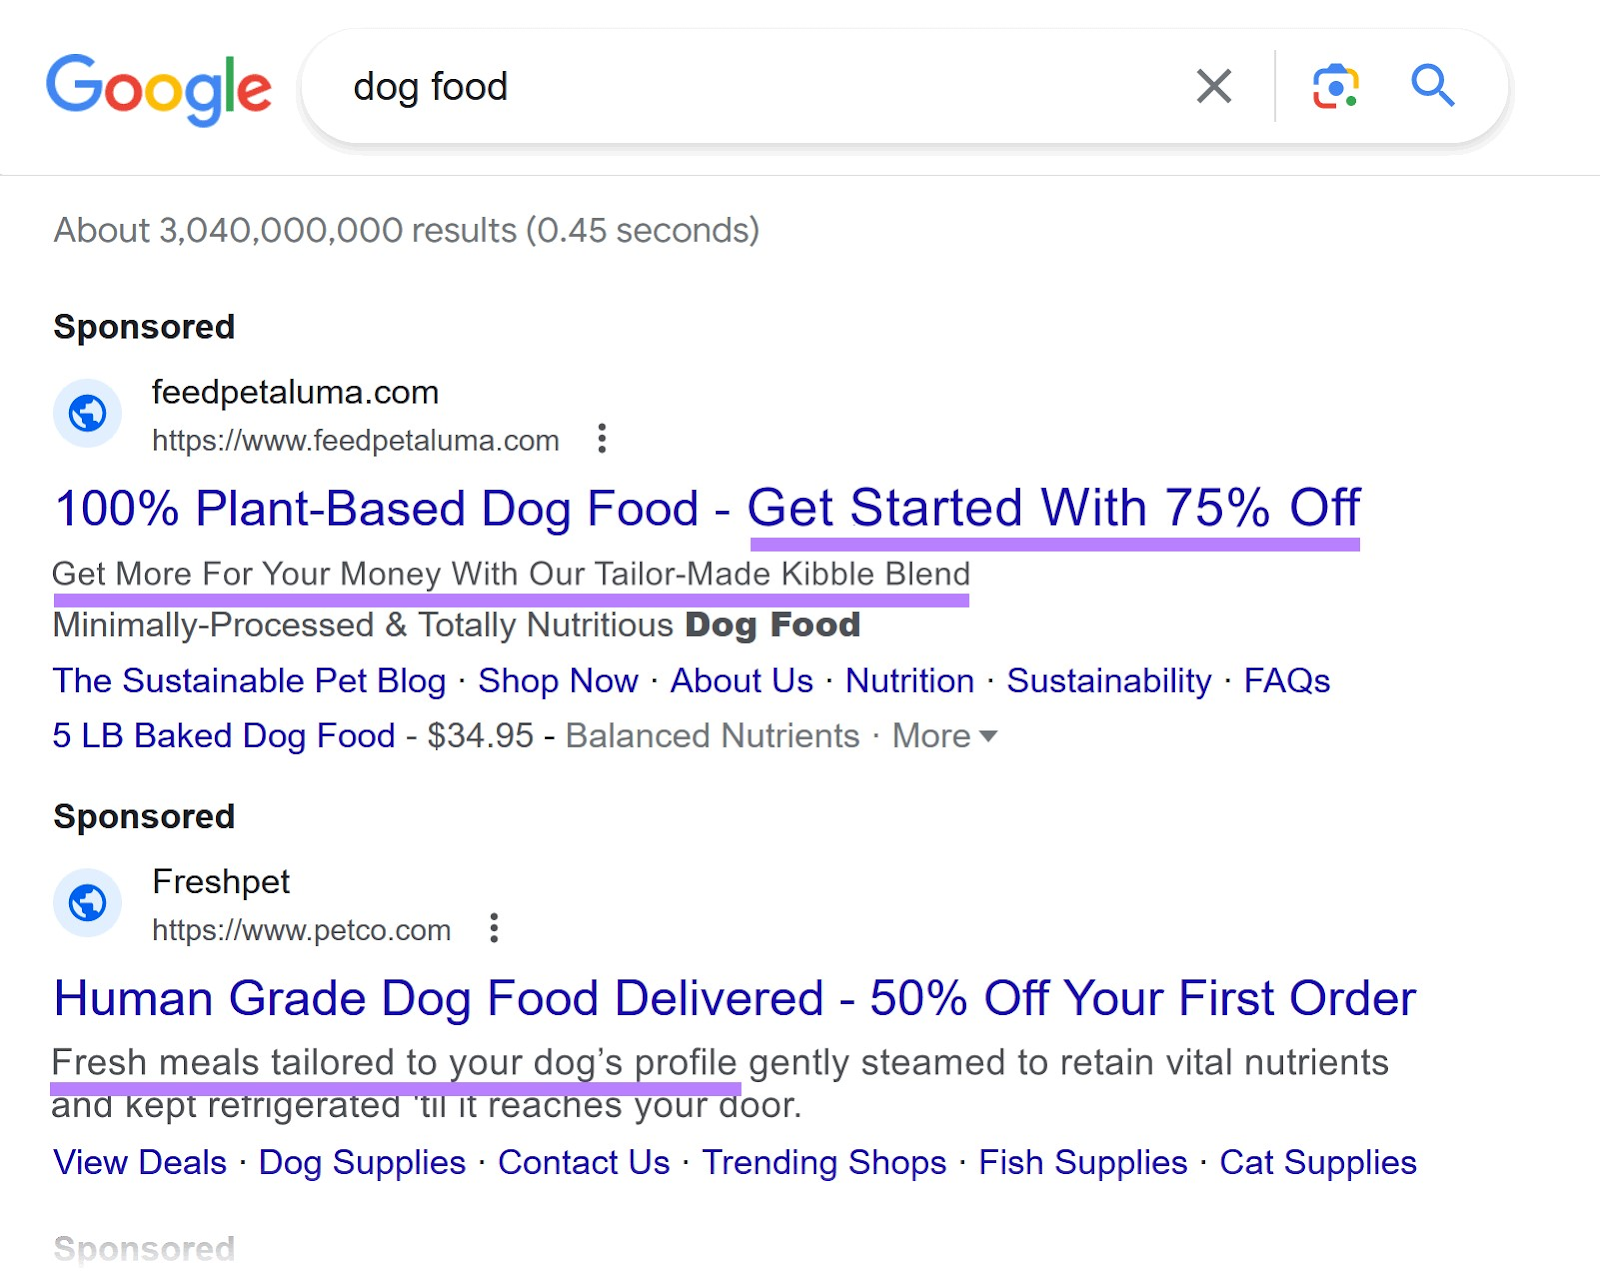 Google SERP showing two ads for “dog food” search